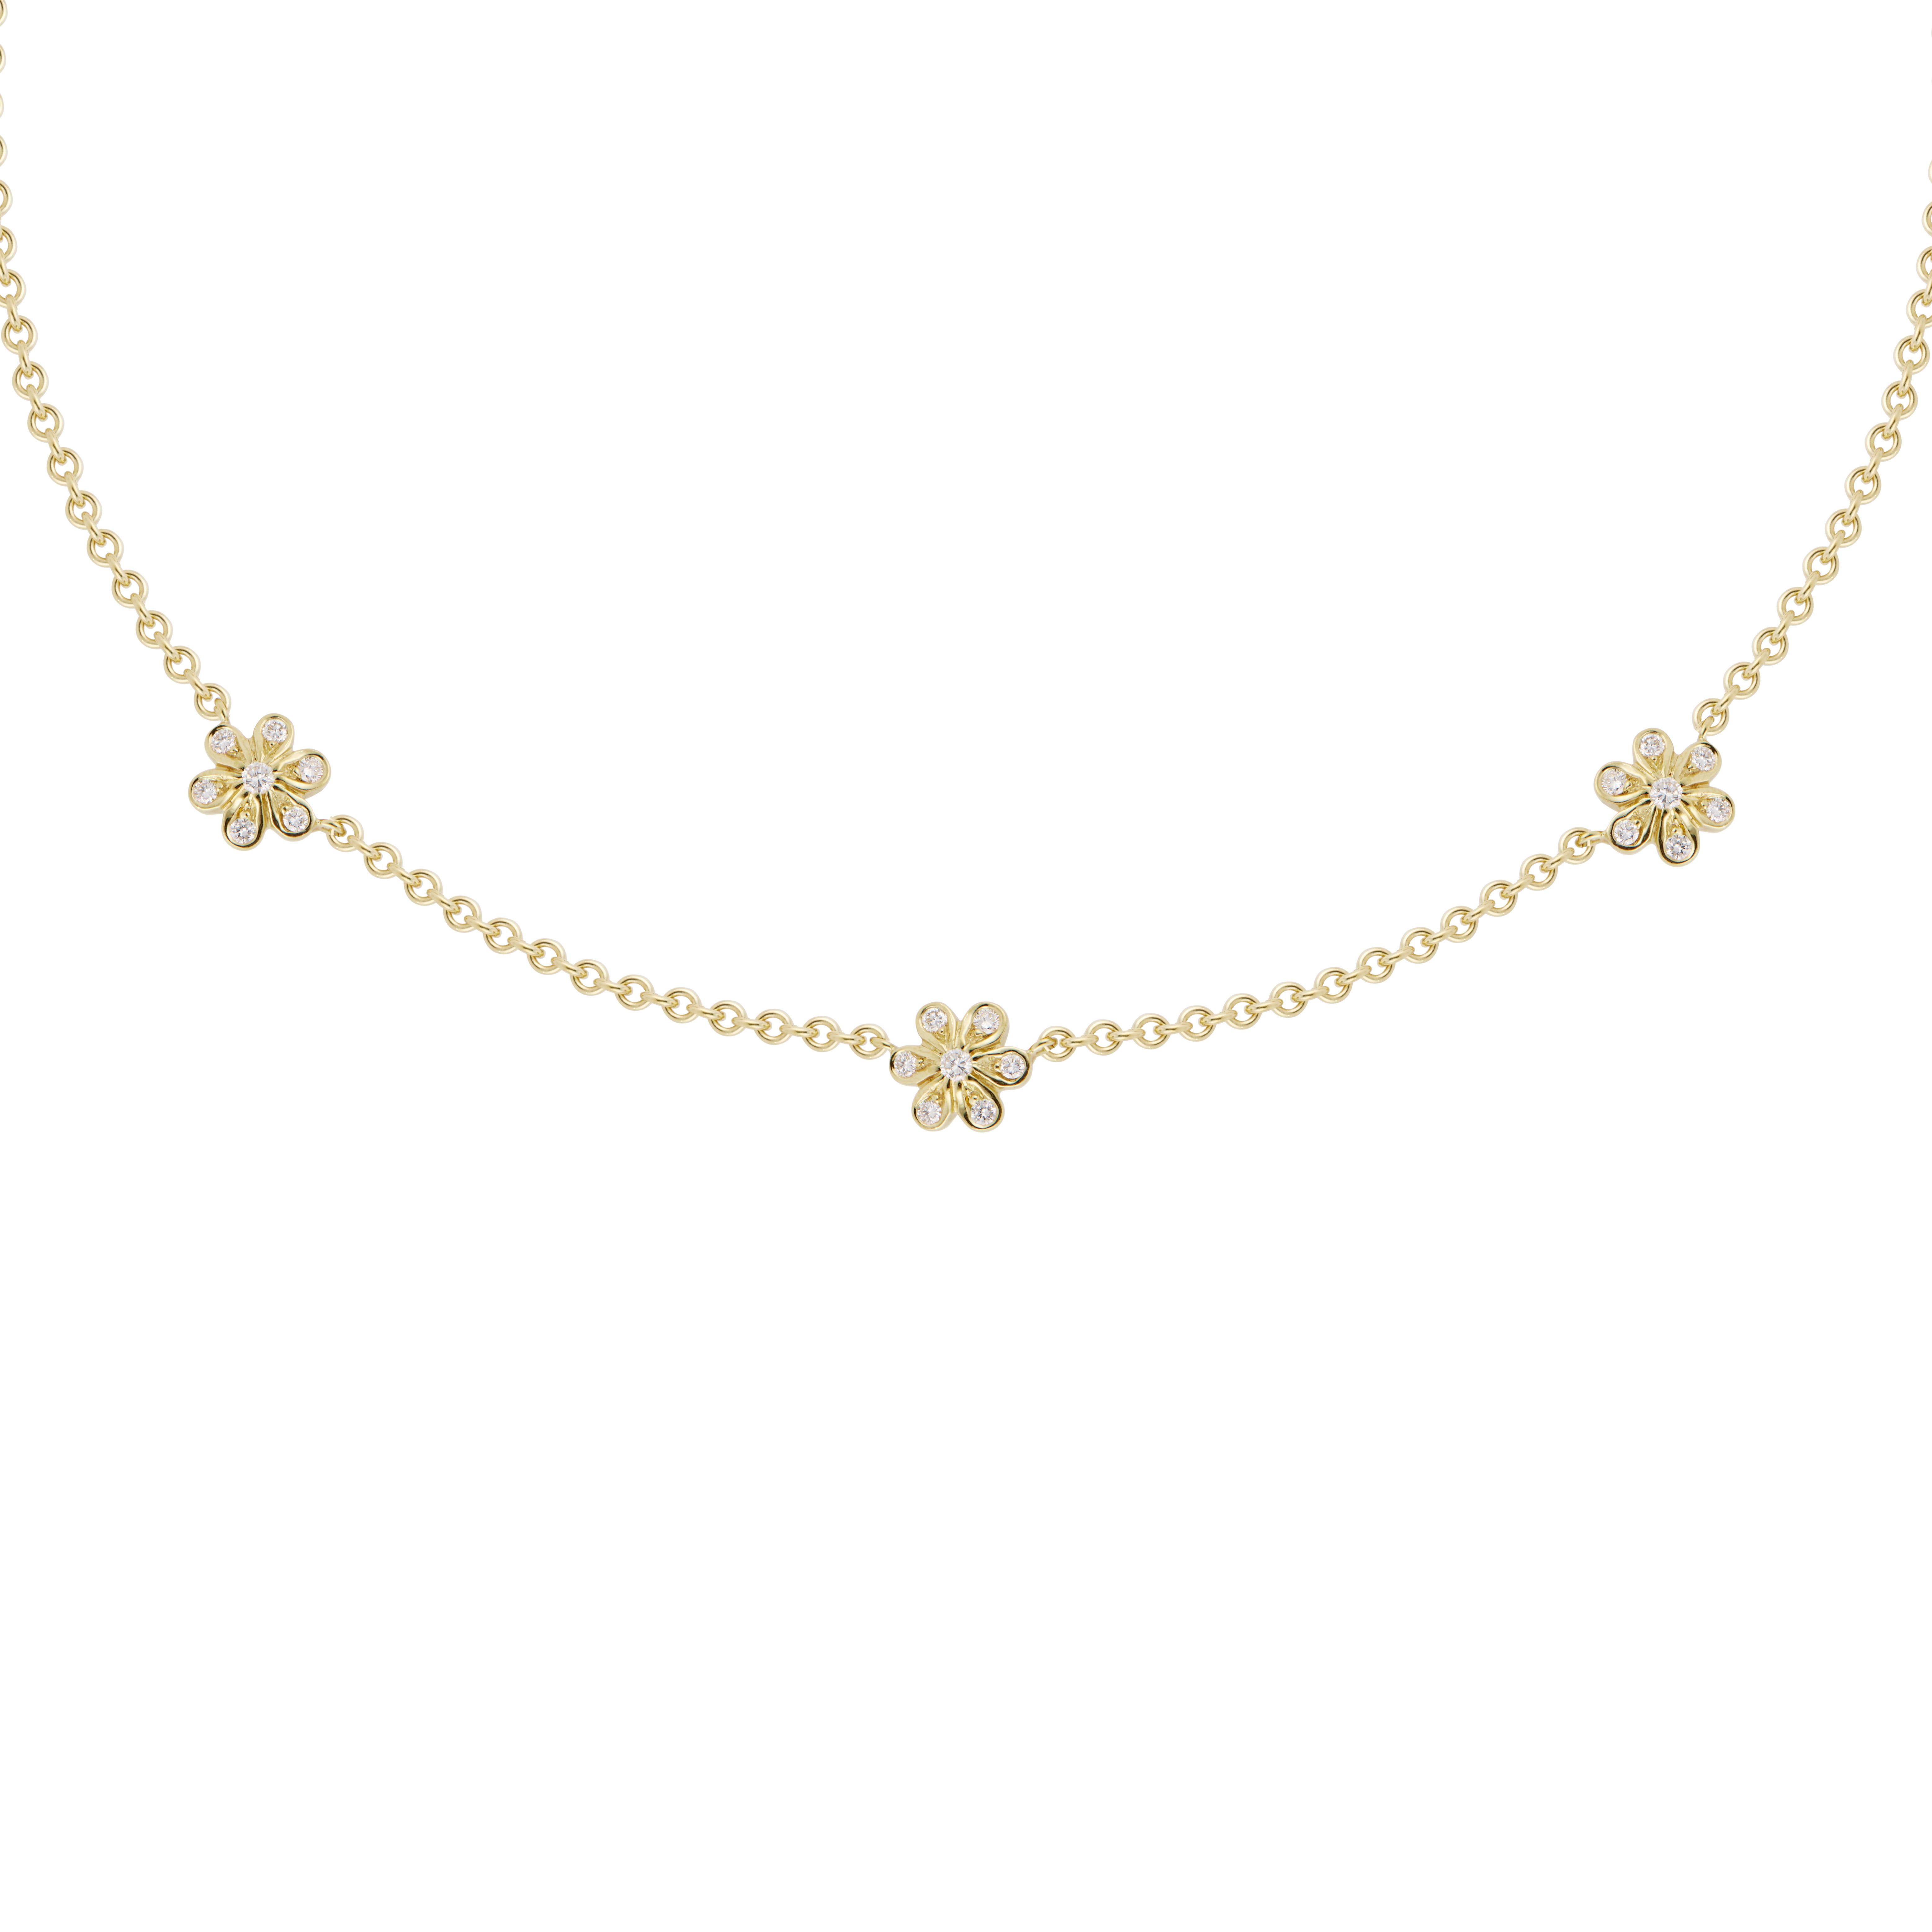 Authentic Seidengang triple diamond flower 18k yellow gold necklace. 21 round brilliant cut diamonds in three gold flowers. 16 inches in length.

21 round brilliant cut diamonds, G VS approx. .35cts
18k yellow gold 
Stamped: 18k
Hallmark: SG